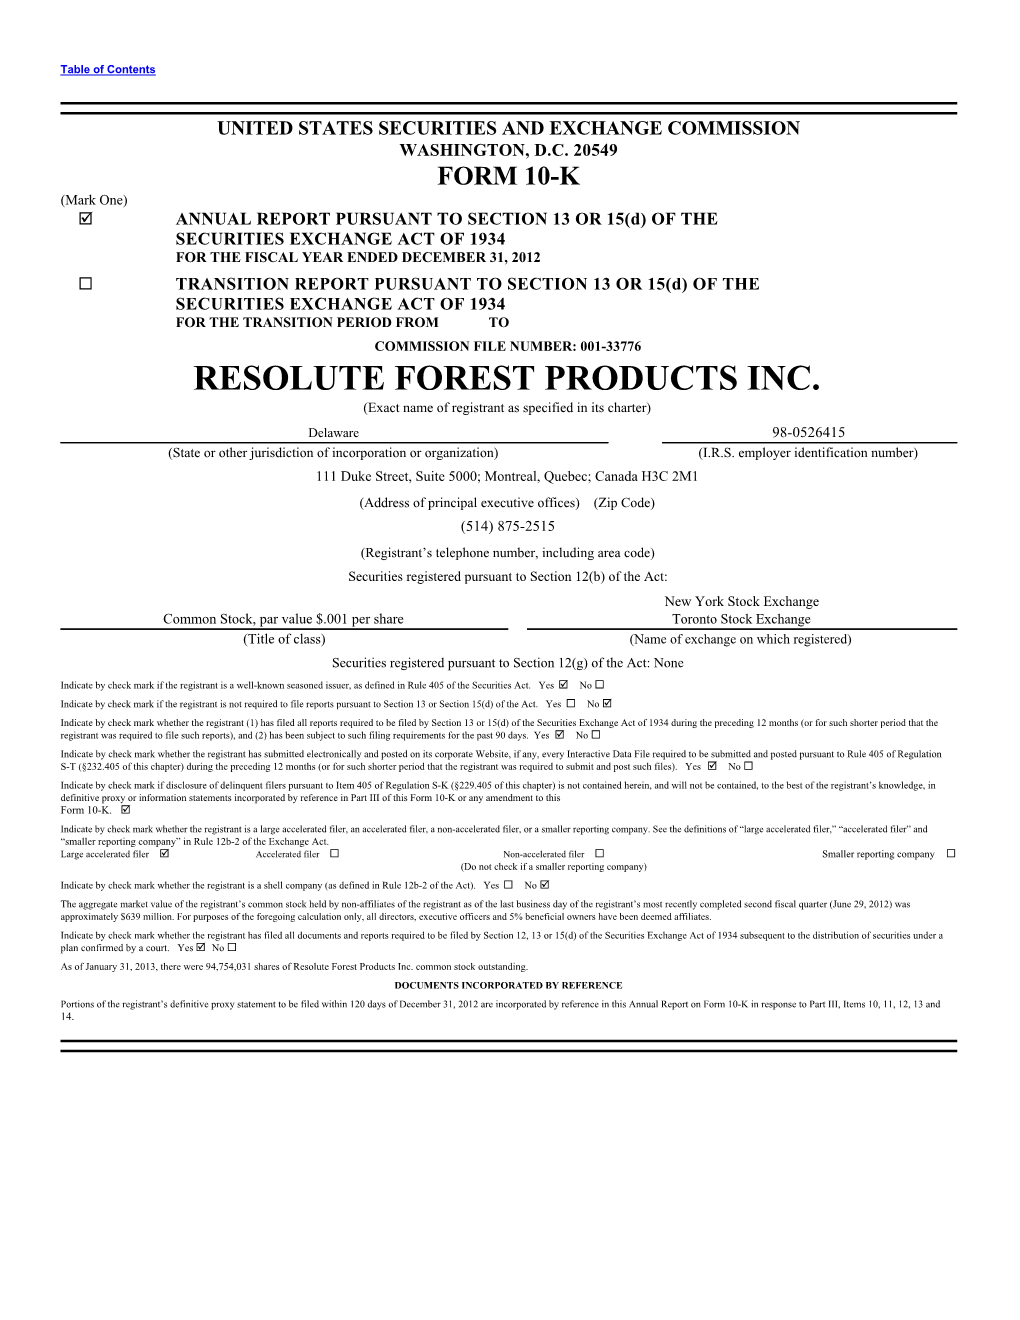 RESOLUTE FOREST PRODUCTS INC. (Exact Name of Registrant As Specified in Its Charter)